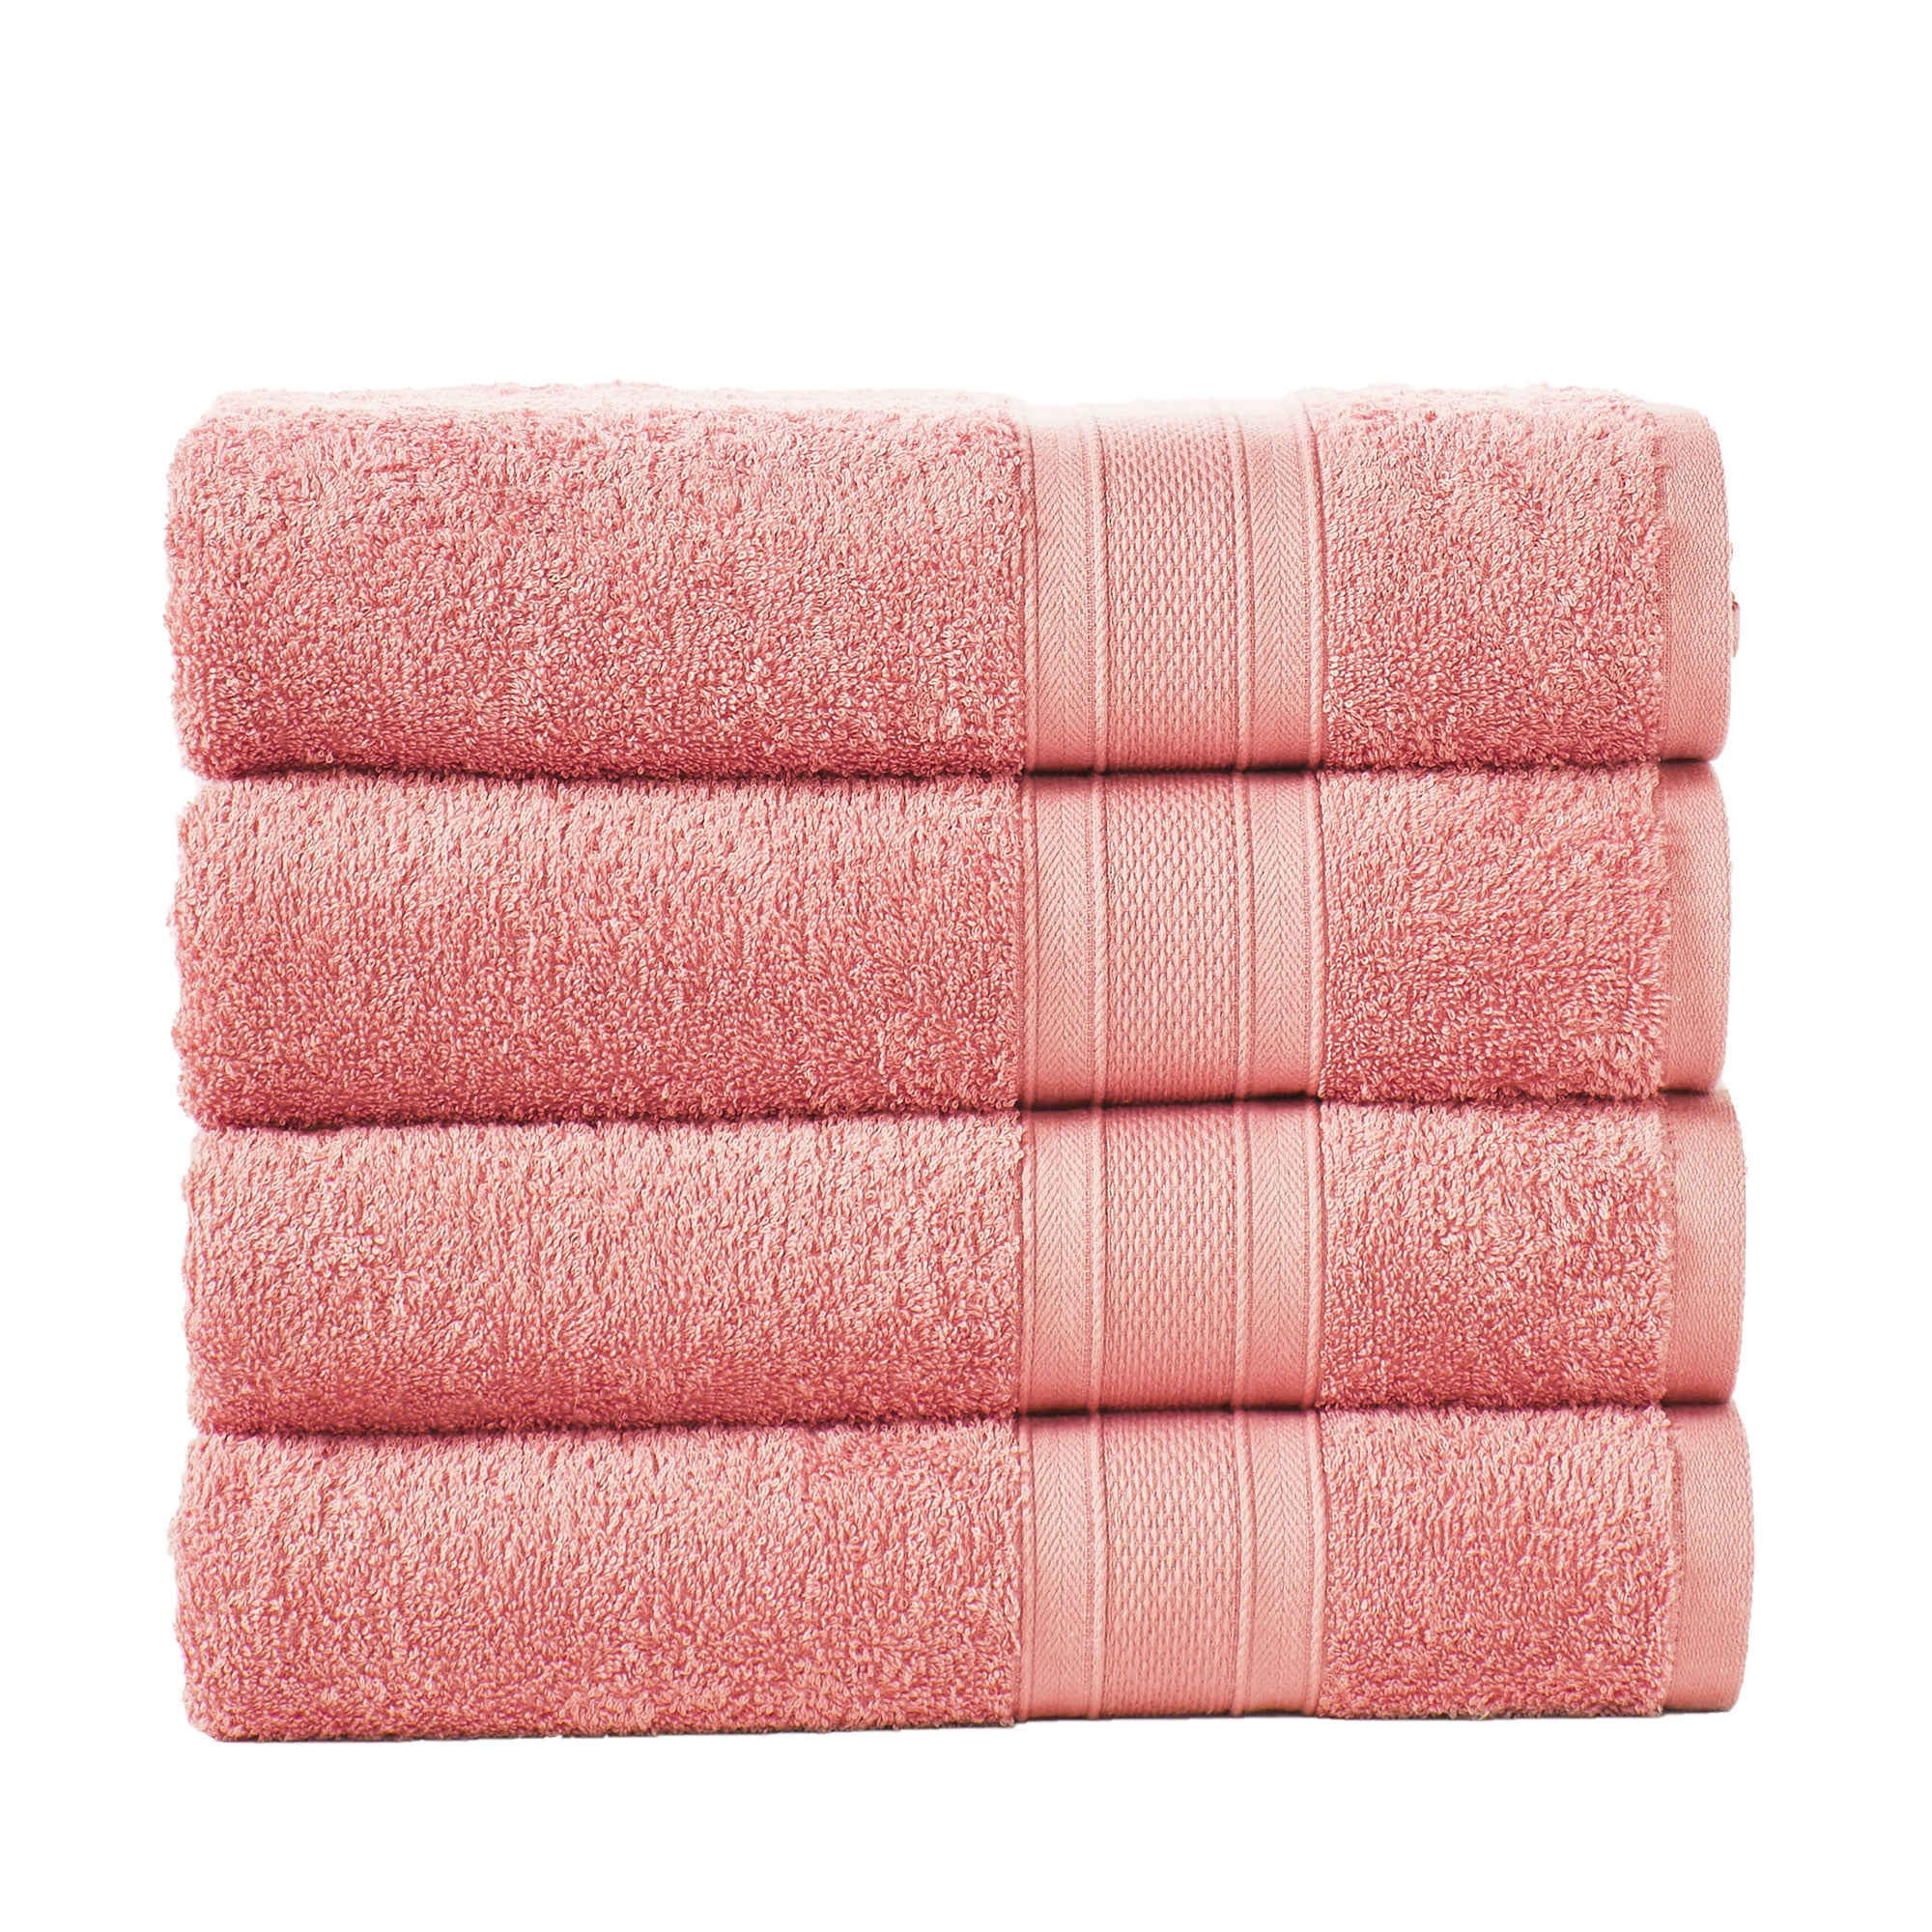 3 supersoft fluffy pink & white face cloths flannels bath time  bathing 